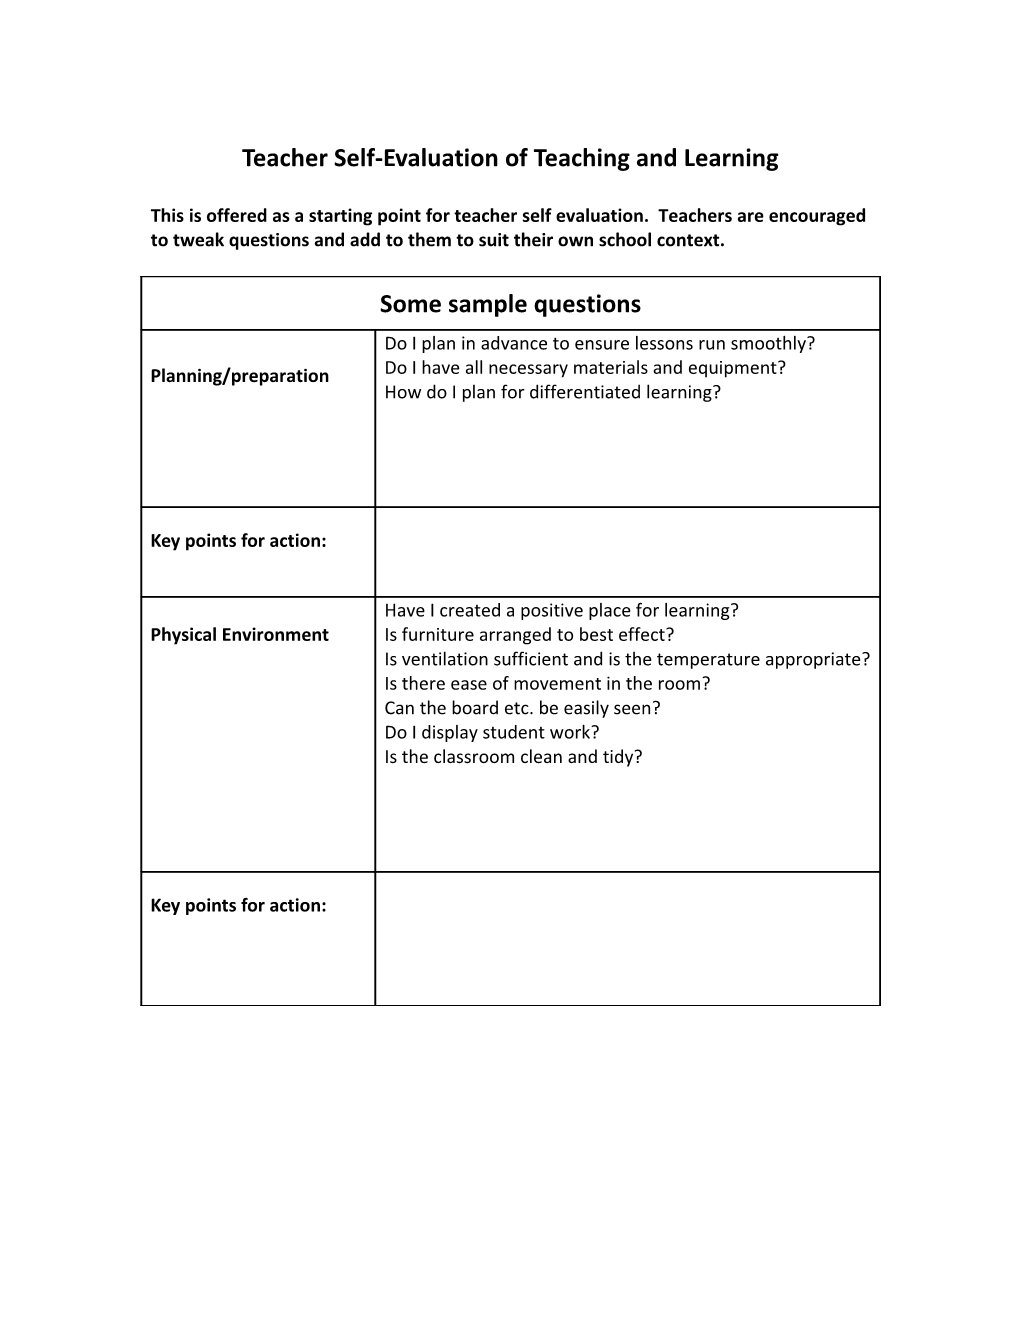 Teacher Self-Evaluation of Teaching and Learning